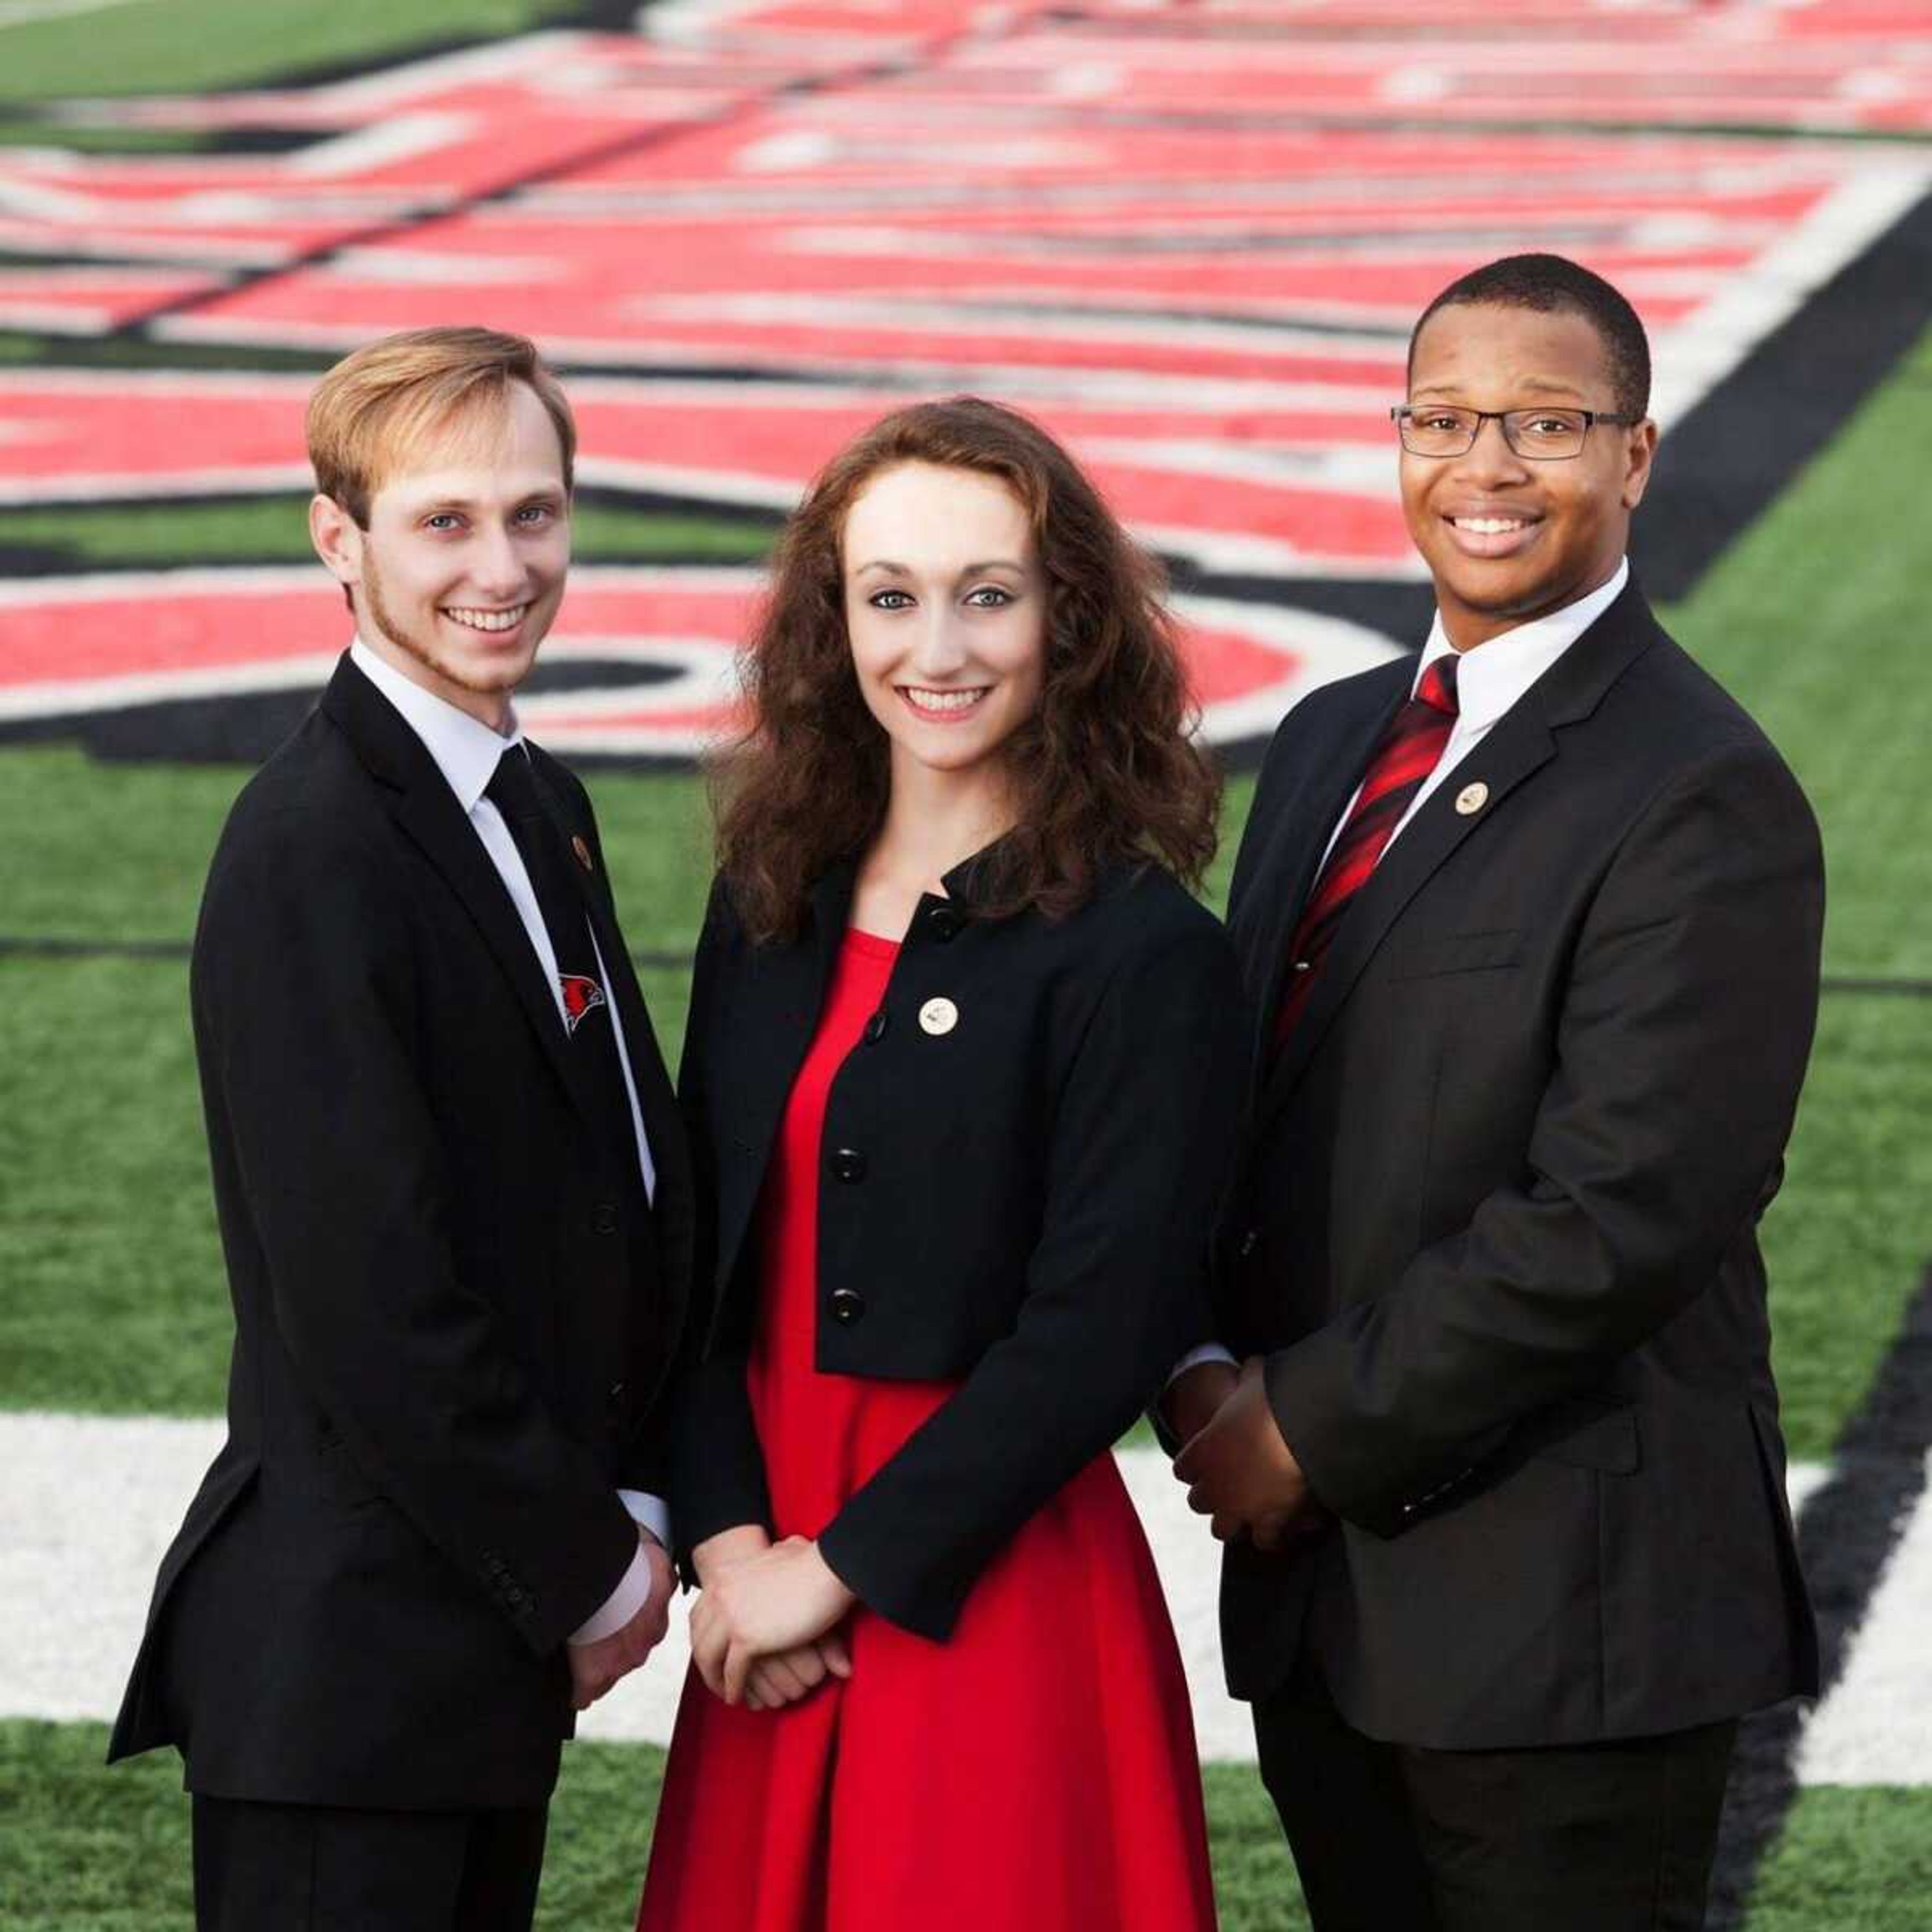 Dylan Kennedy (left) and Peyton Mogley (center) are returning to Student Government Association for the 2017-2018 academic year as vice president and president. They will be joined by their new treasurer Andre Parker (right).  Submitted photo